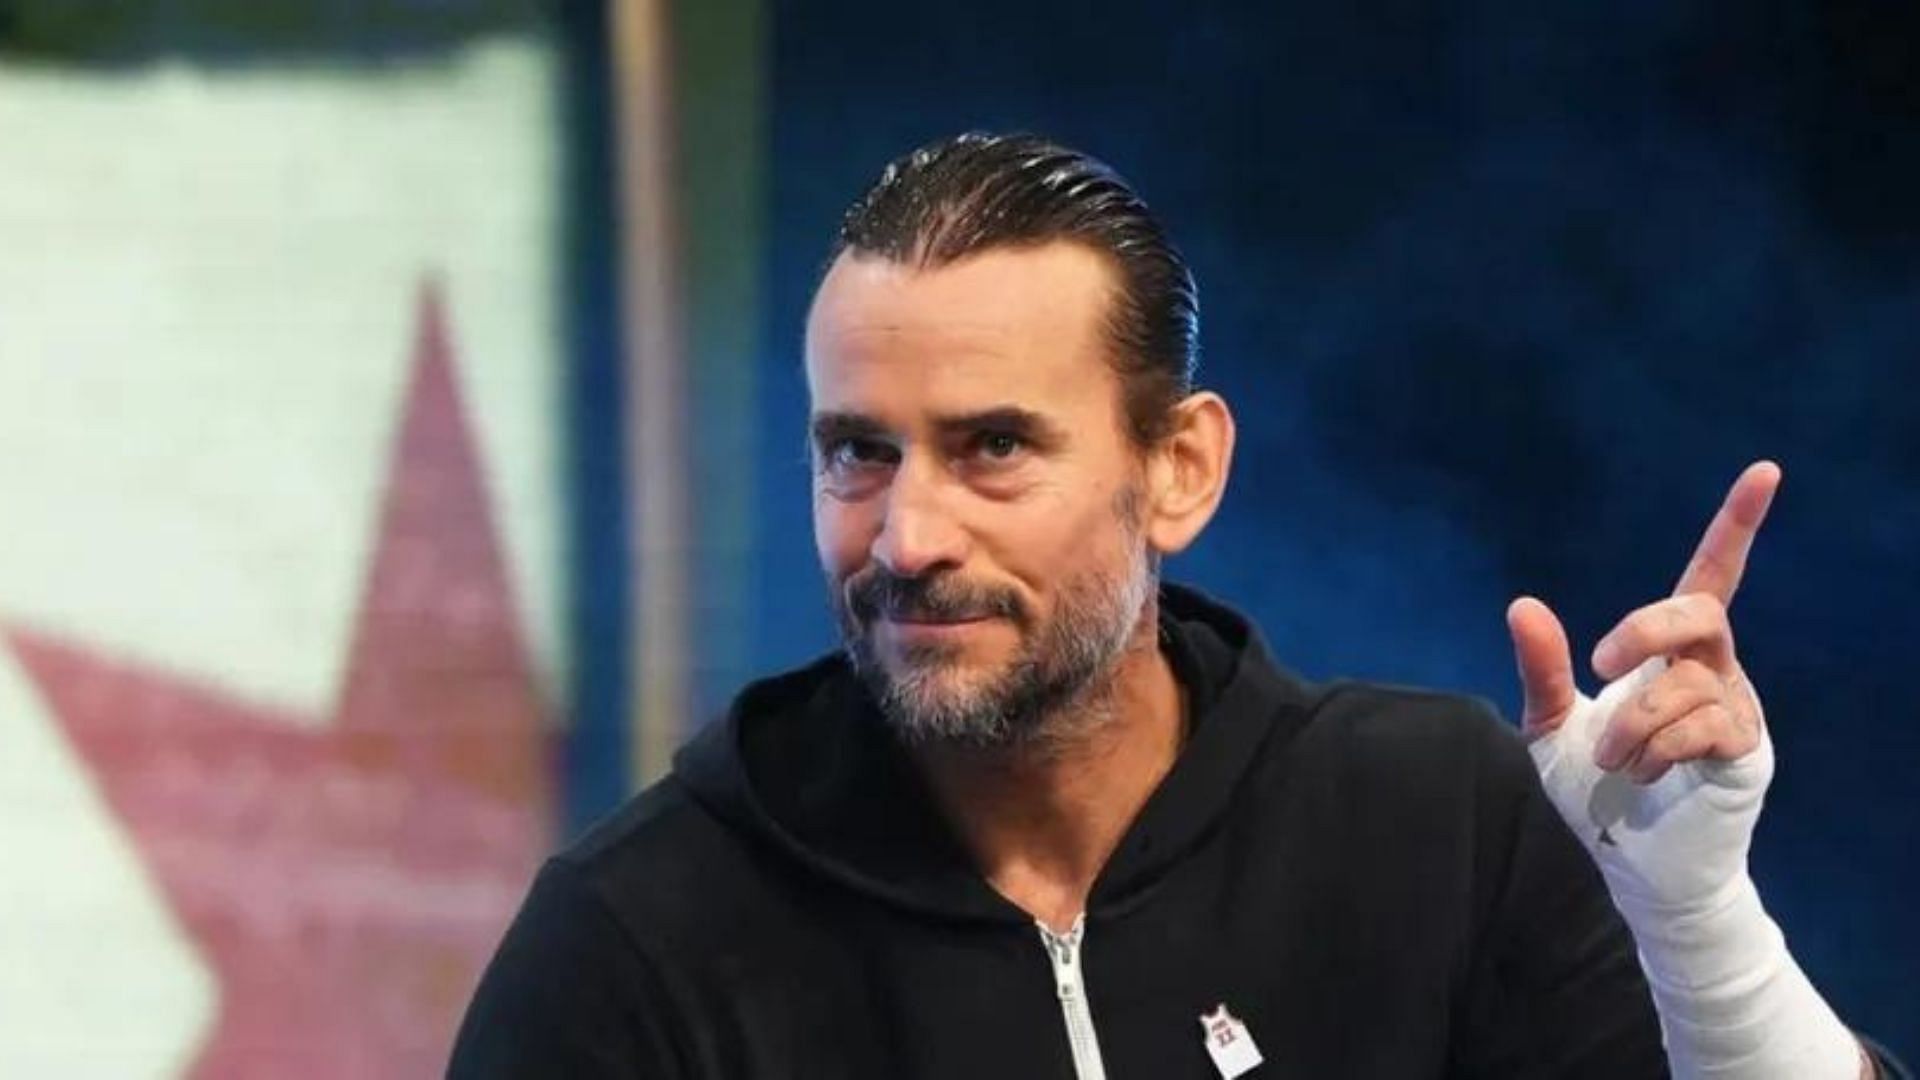 CM Punk is the biggest name in AEW right now